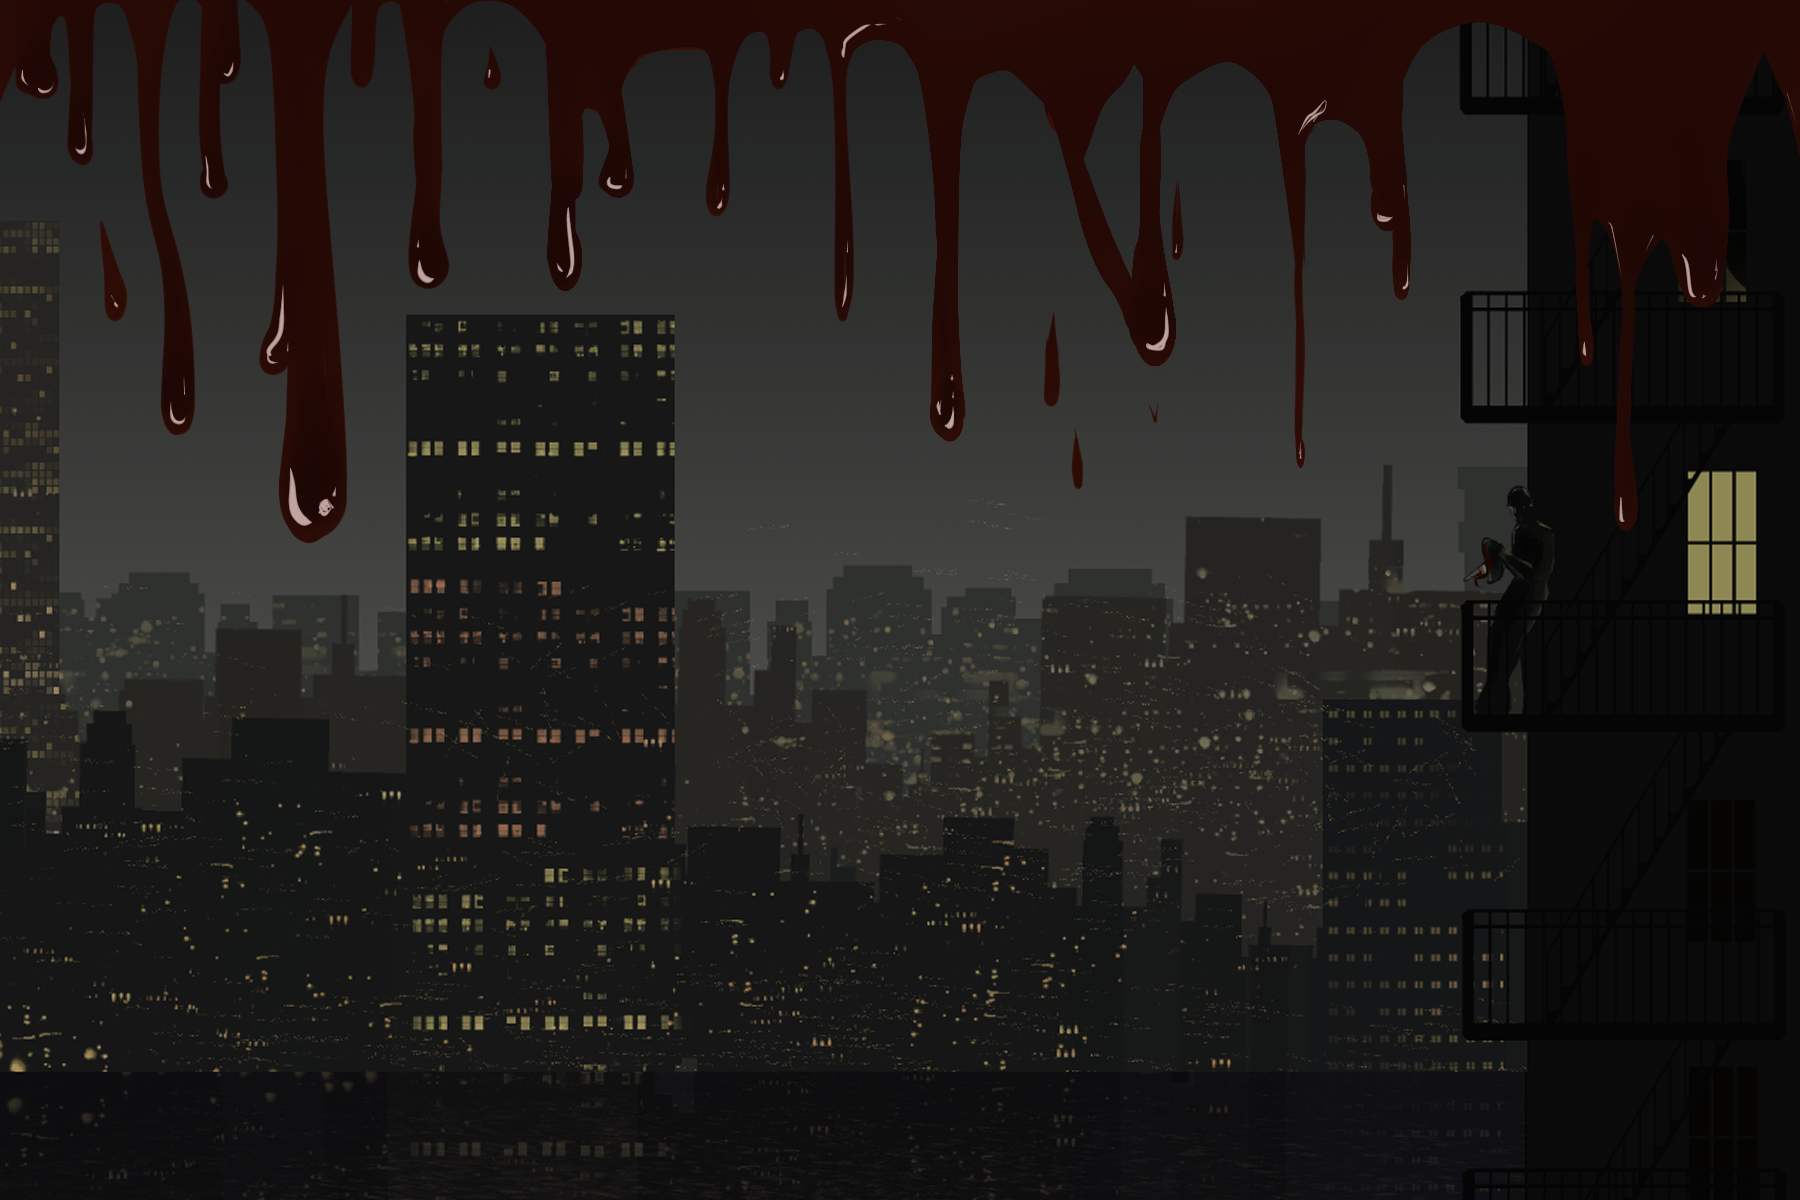 In an article about Marvel and to demonstrate the hyperviolence that is revolutionizing the superhero film genre, an illustration depicts blood dripping from the top of the image down to a darkened city skyline.